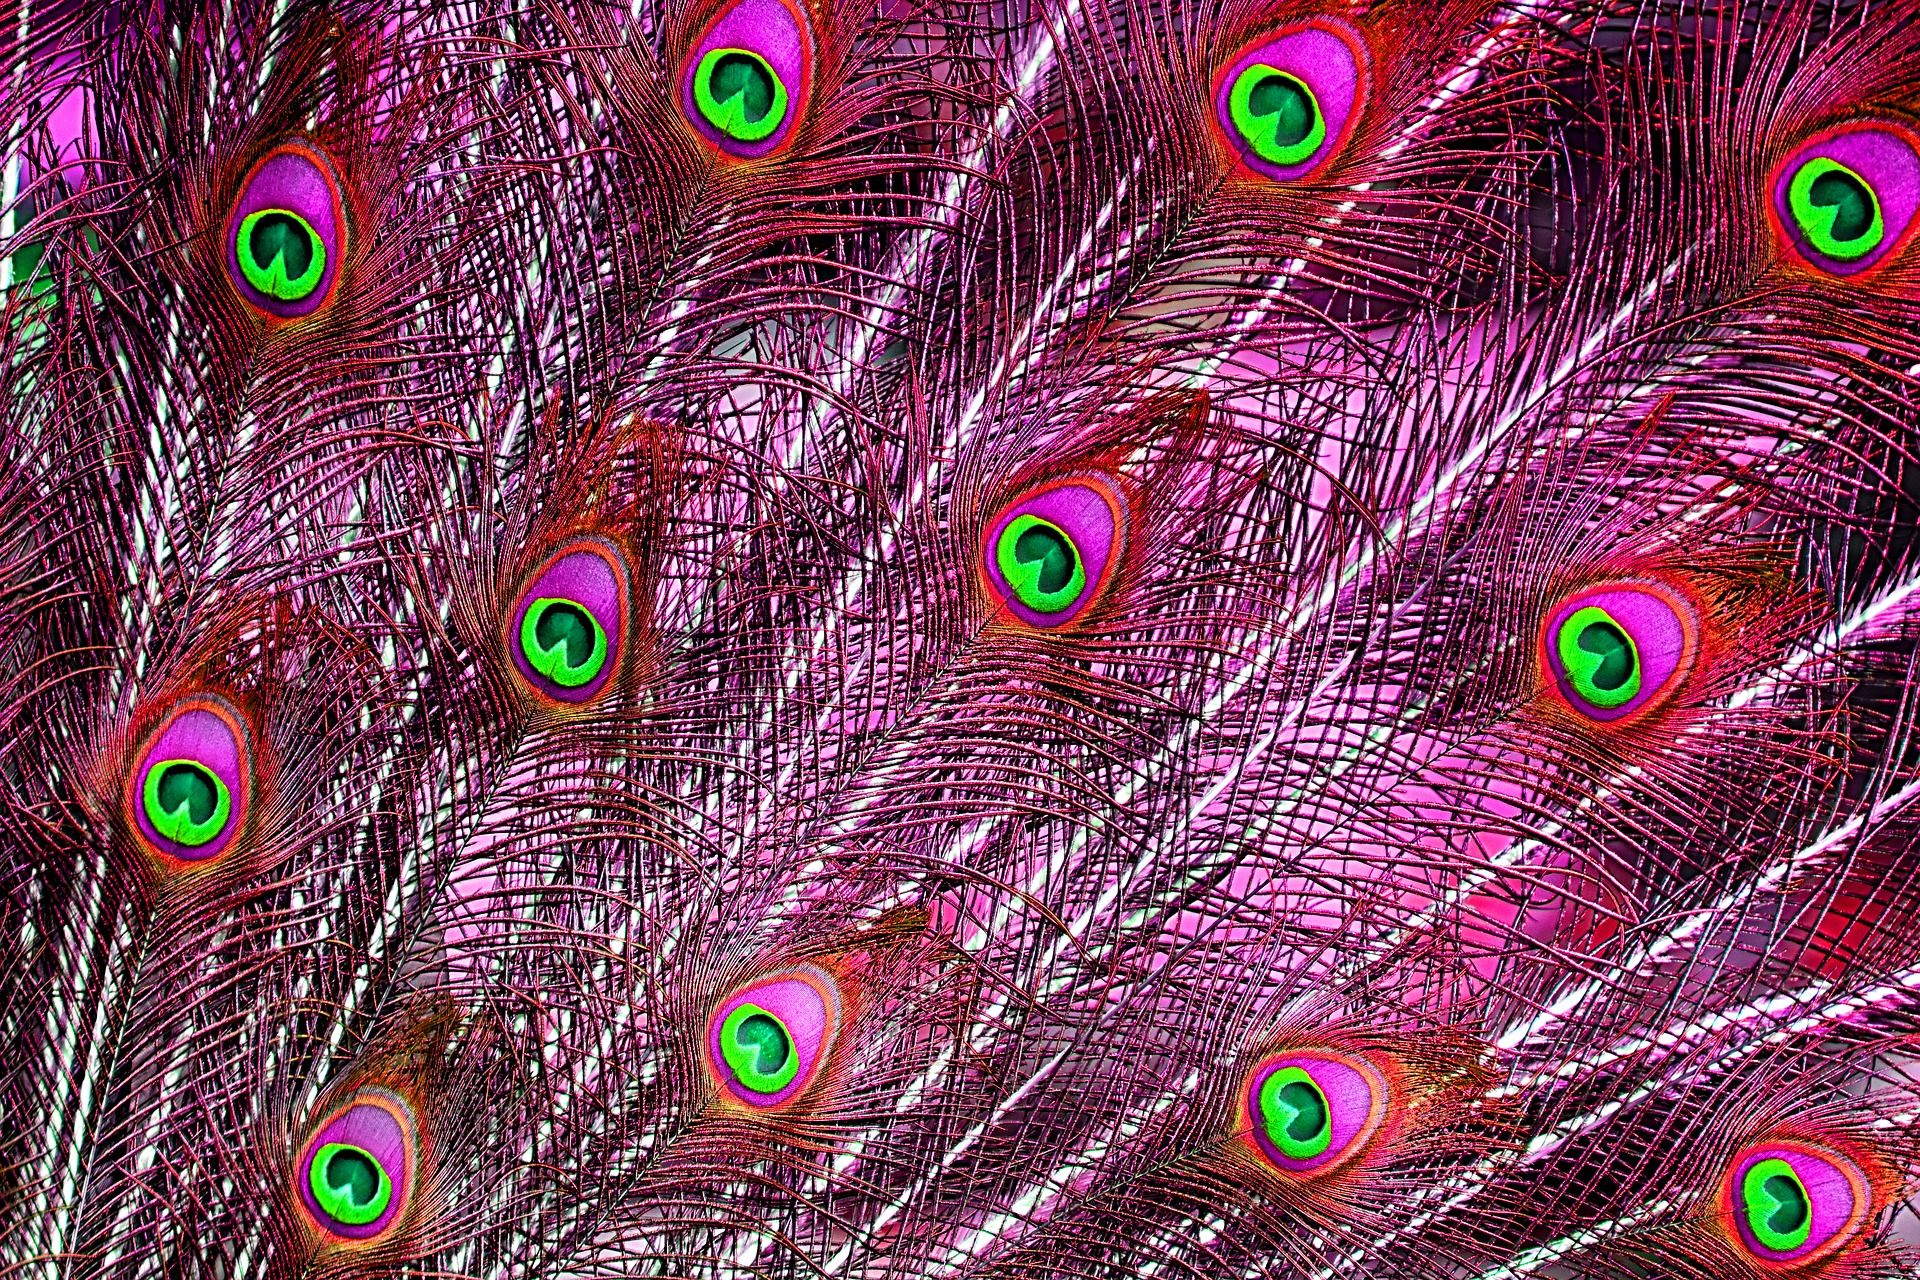 Pink Peacock Feather Wallpaper - Purple Colours Of Peacock Feathers - HD Wallpaper 